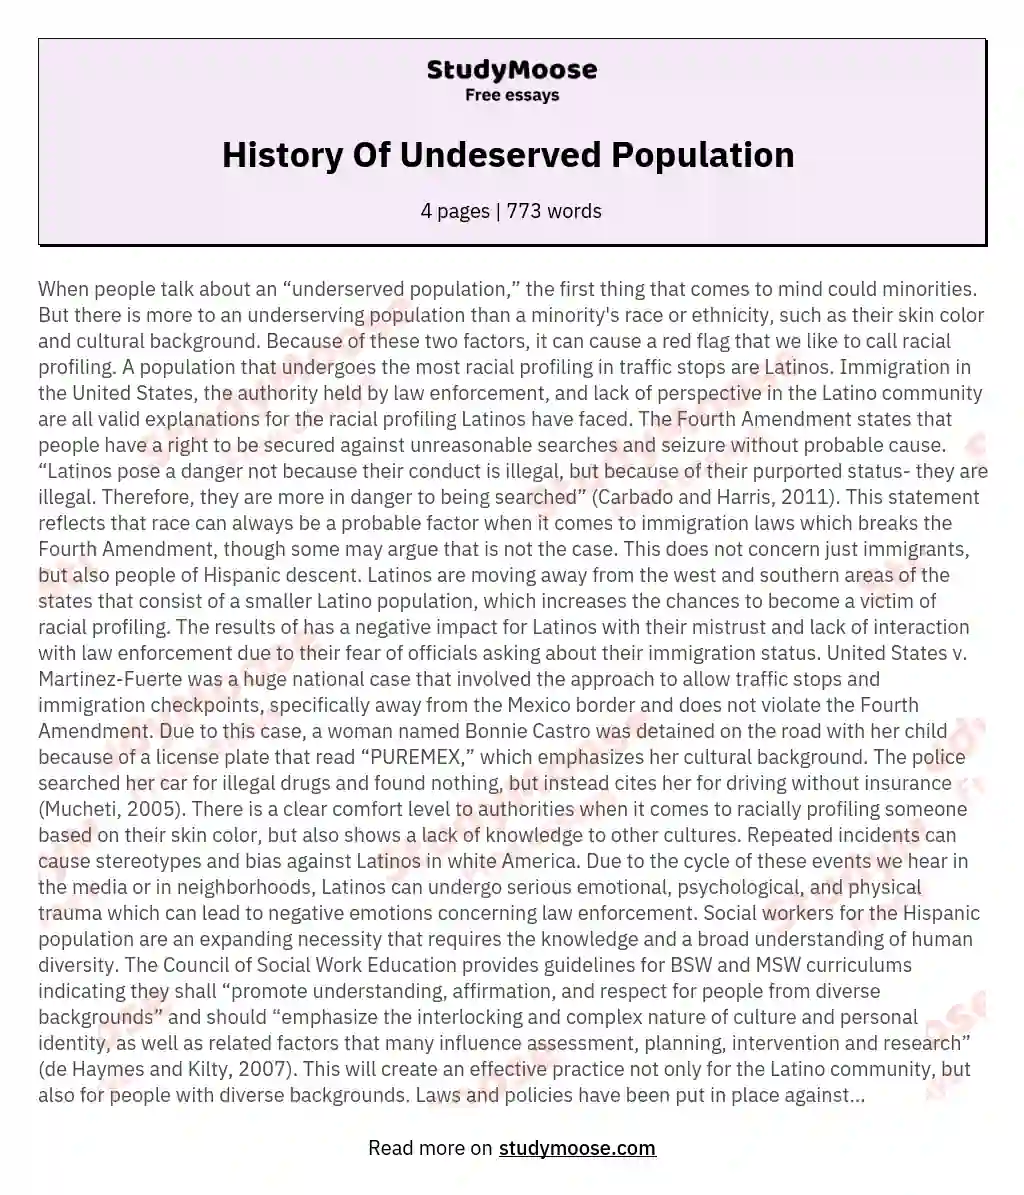 History Of Undeserved Population  essay